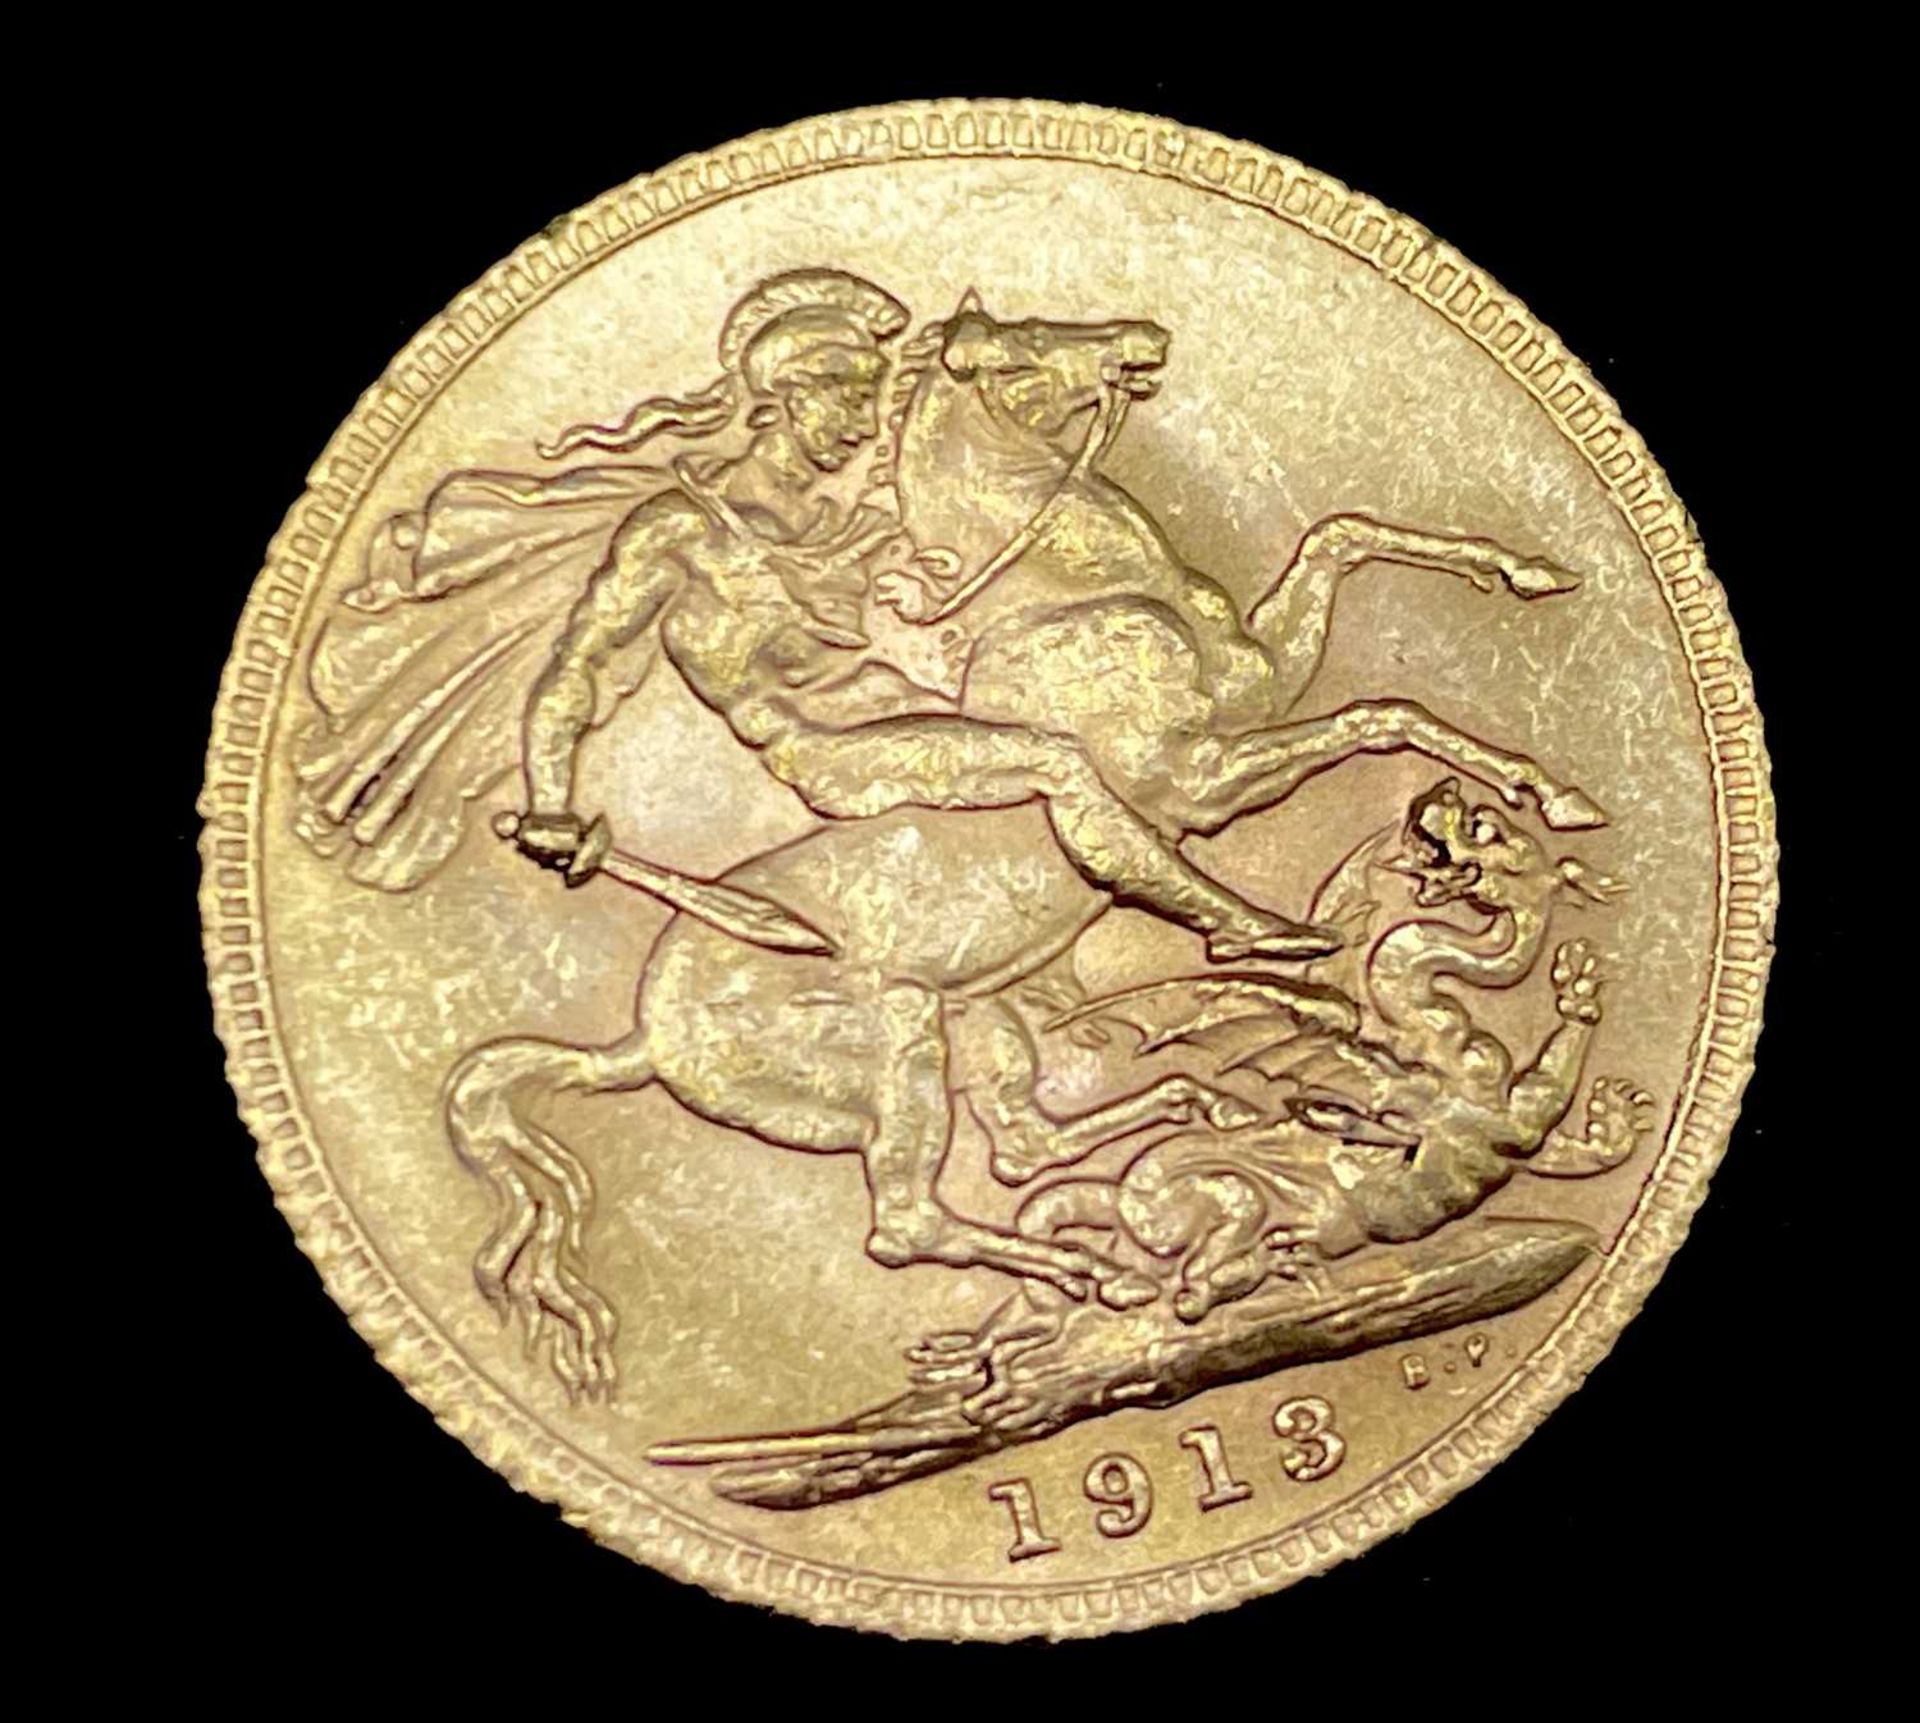 Great Britain Gold Sovereign 1913 NEF George V Condition: please request a condition report if you